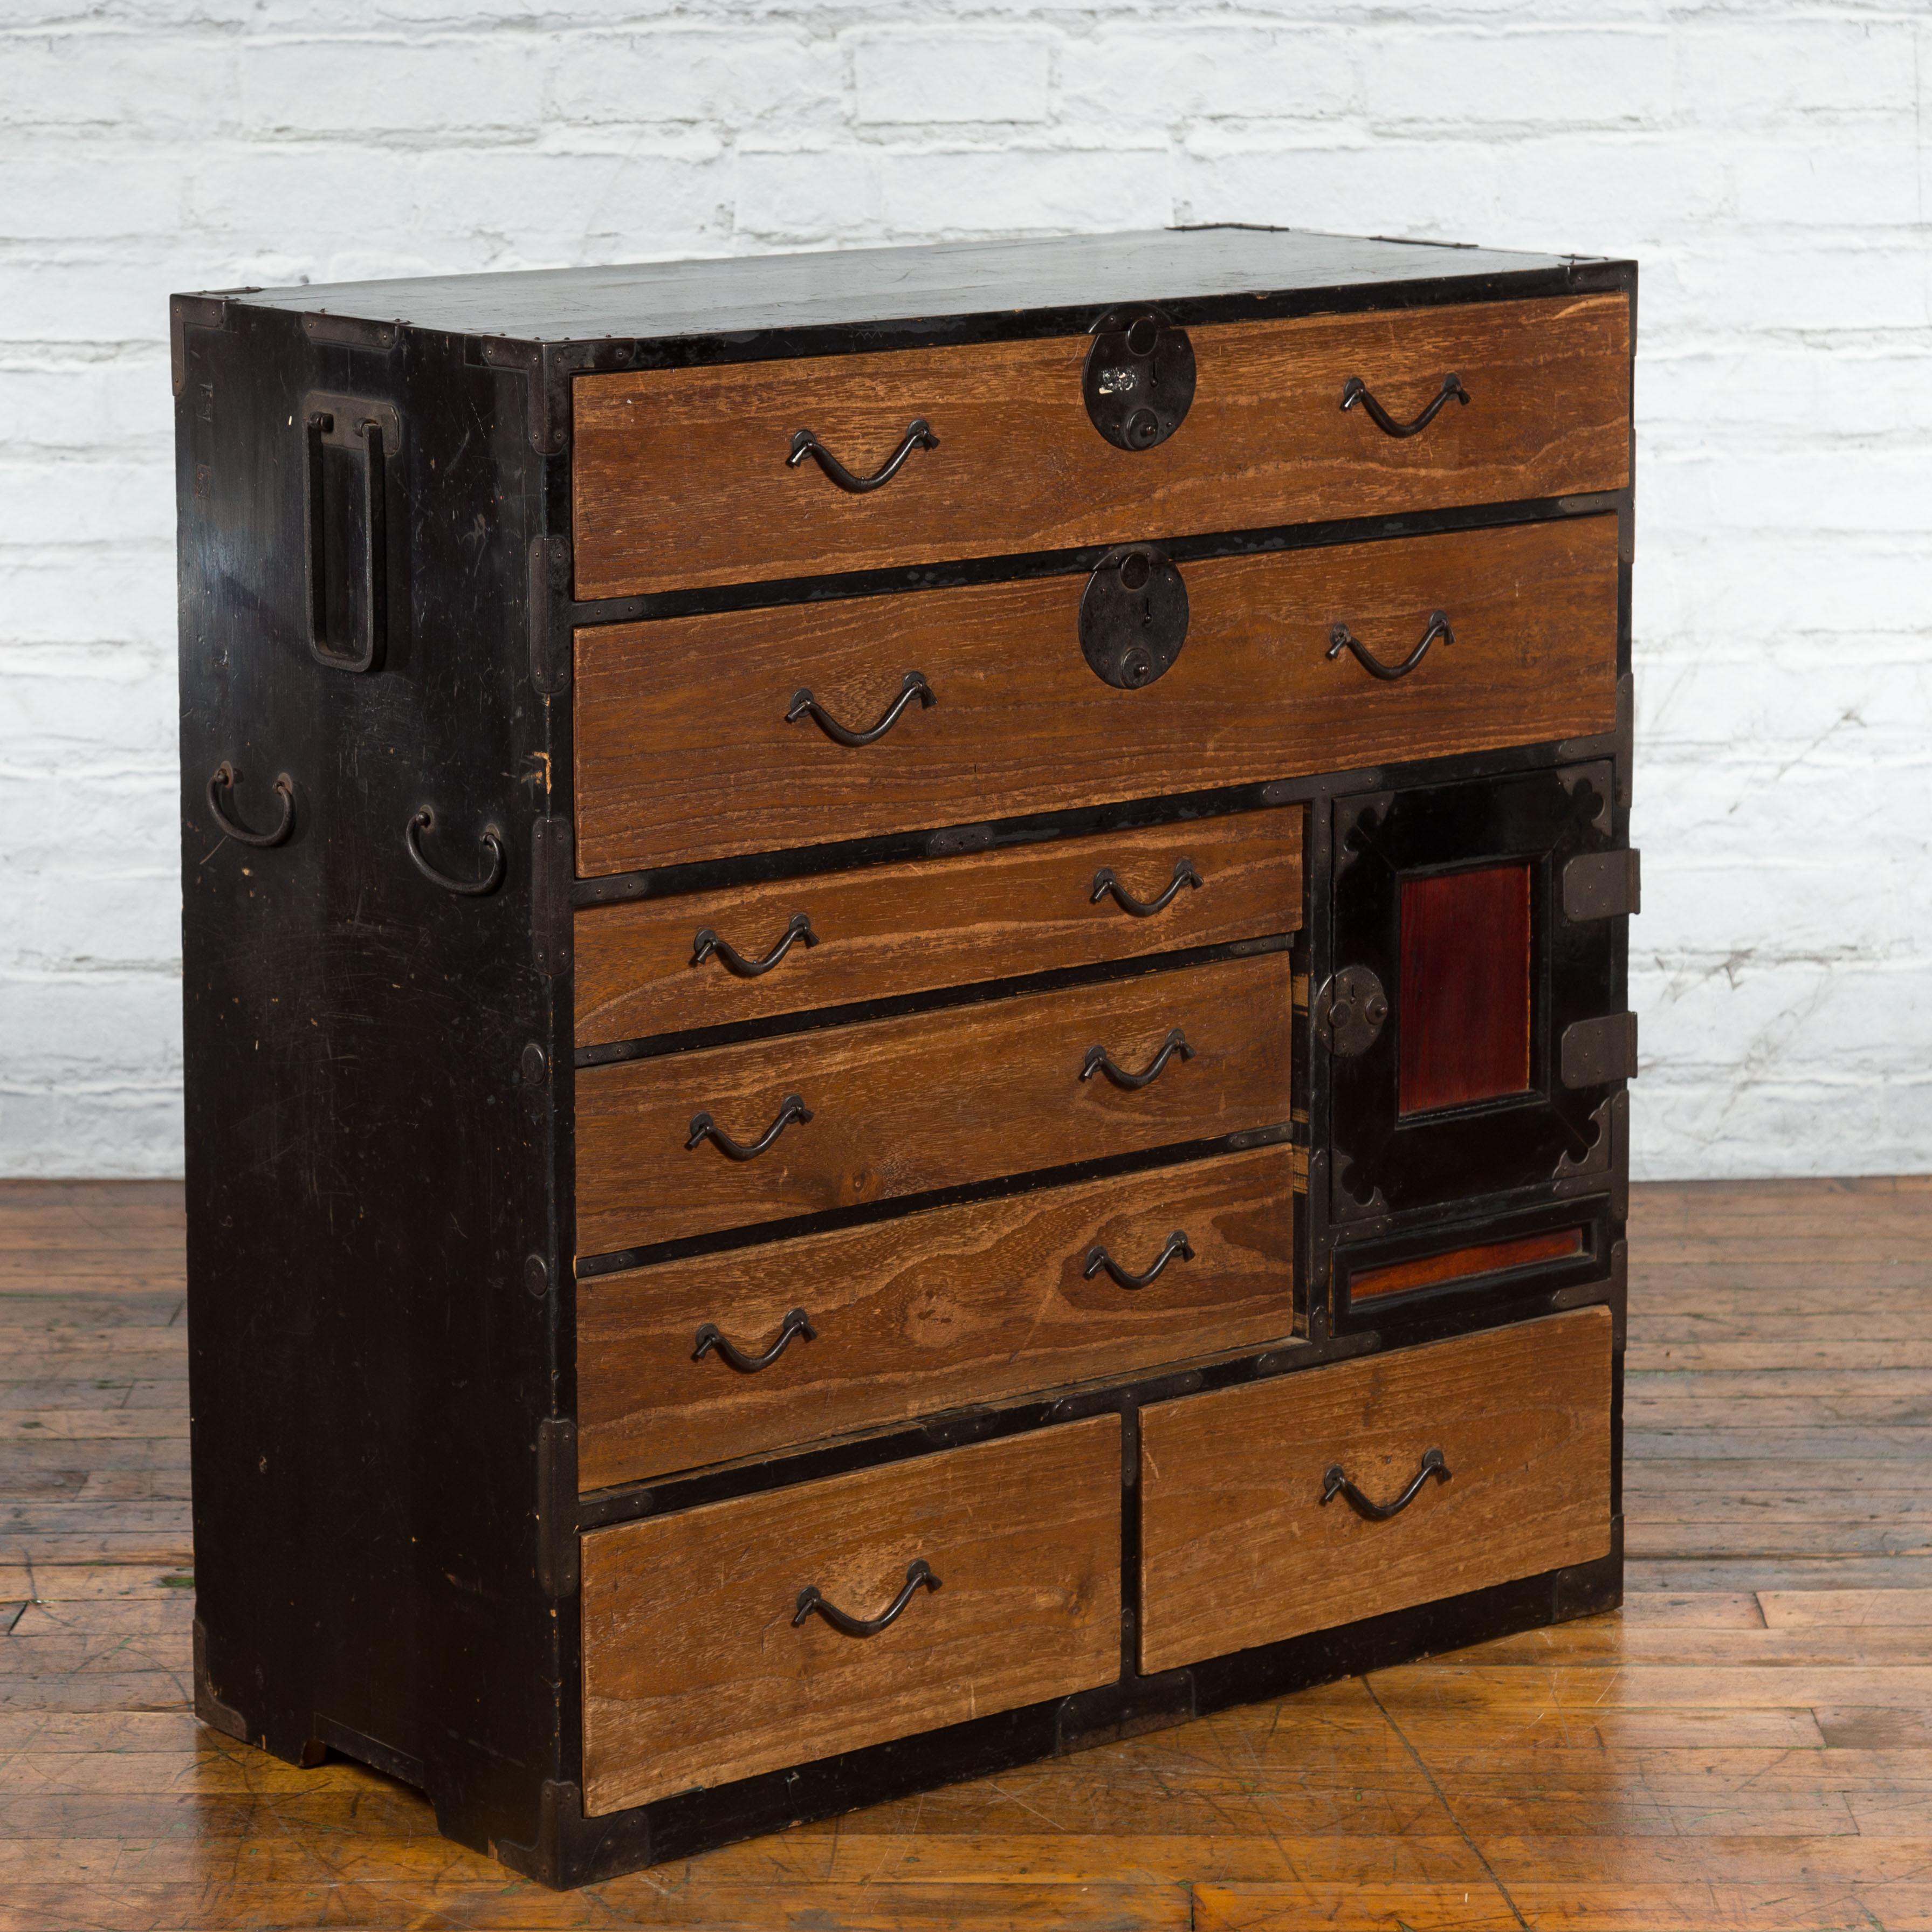 Japanese 19th Century Meiji Period Brown and Black Tansu Clothing Chest For Sale 11